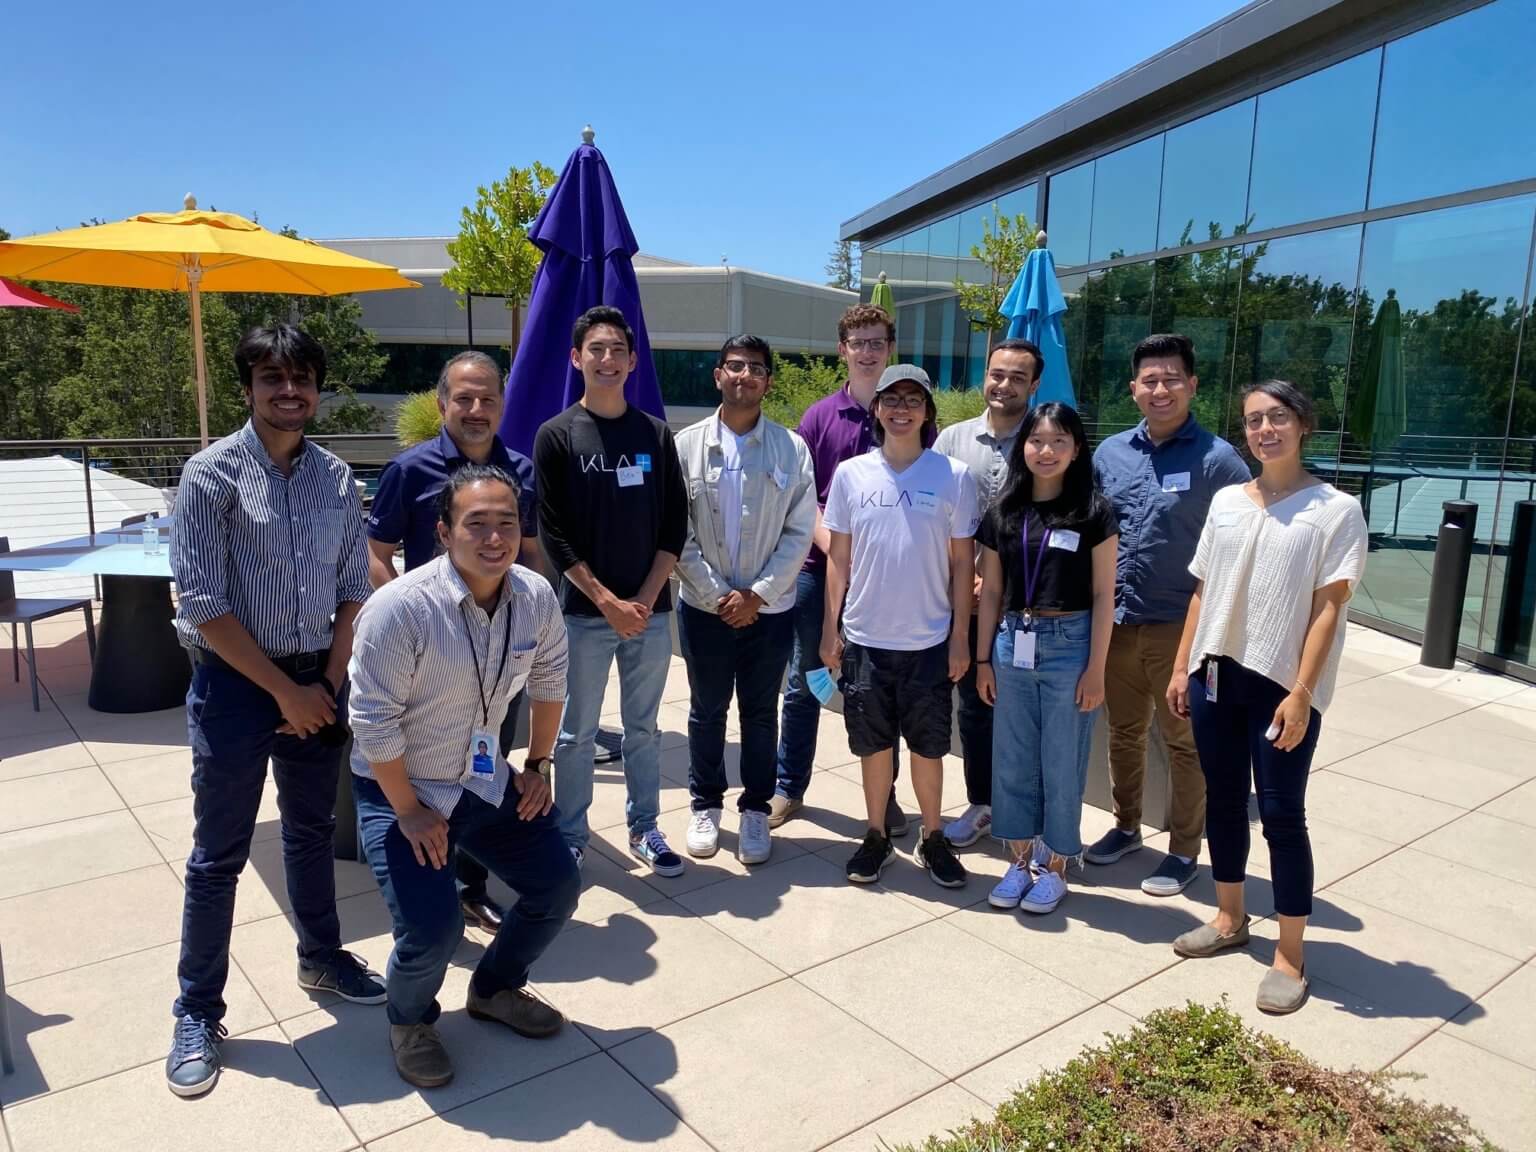 Interns pose after having lunch with Ahmad Khan, KLA's president of semiconductor process control, in Milpitas, California.